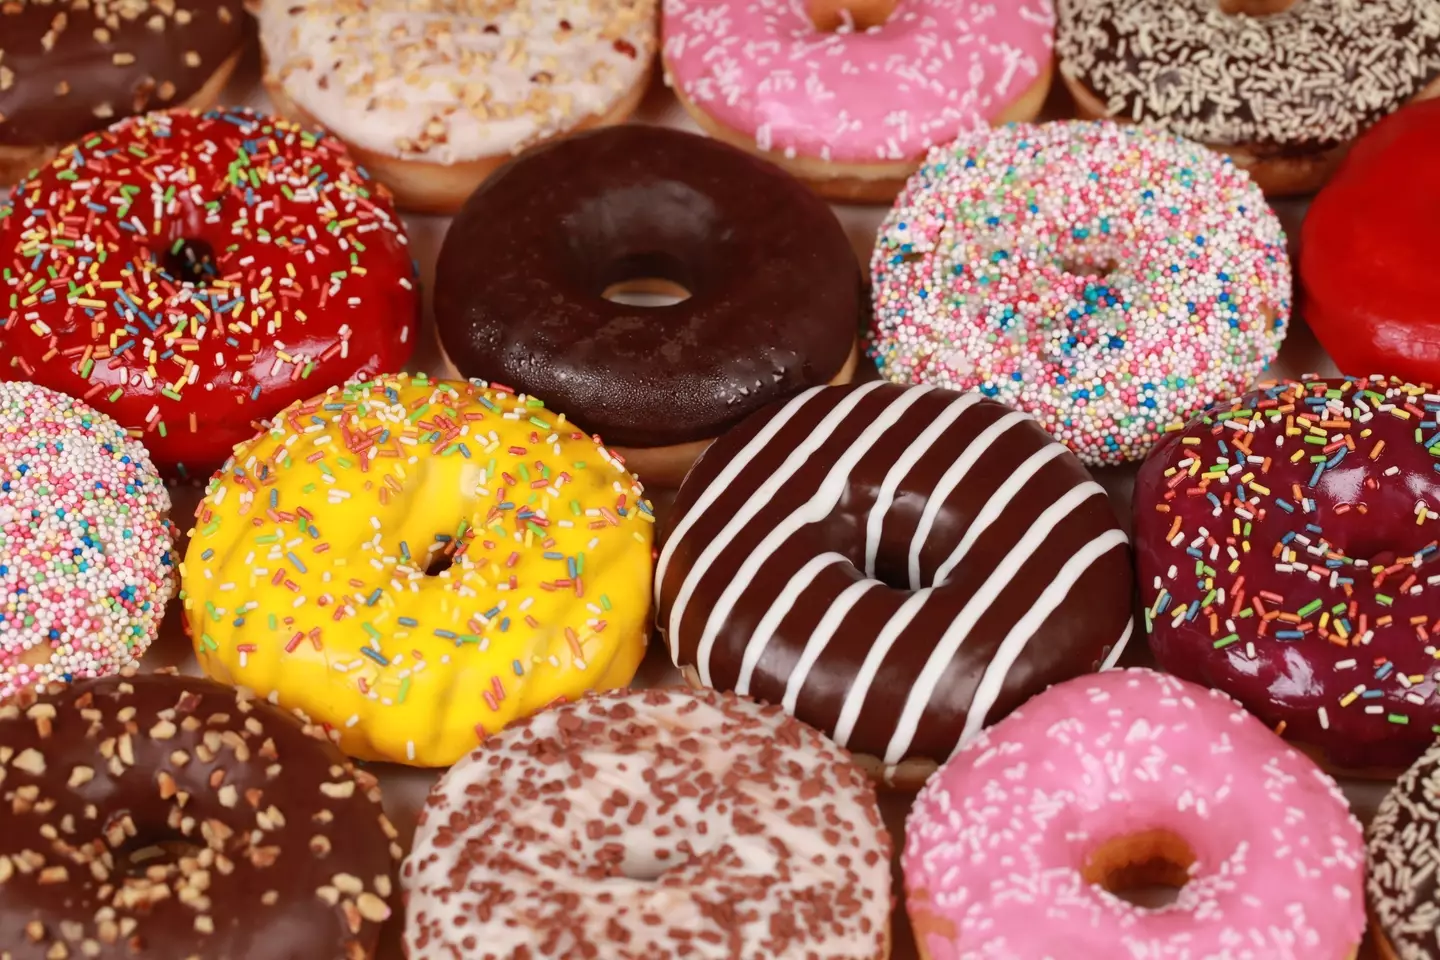 Today is National Donut Day (